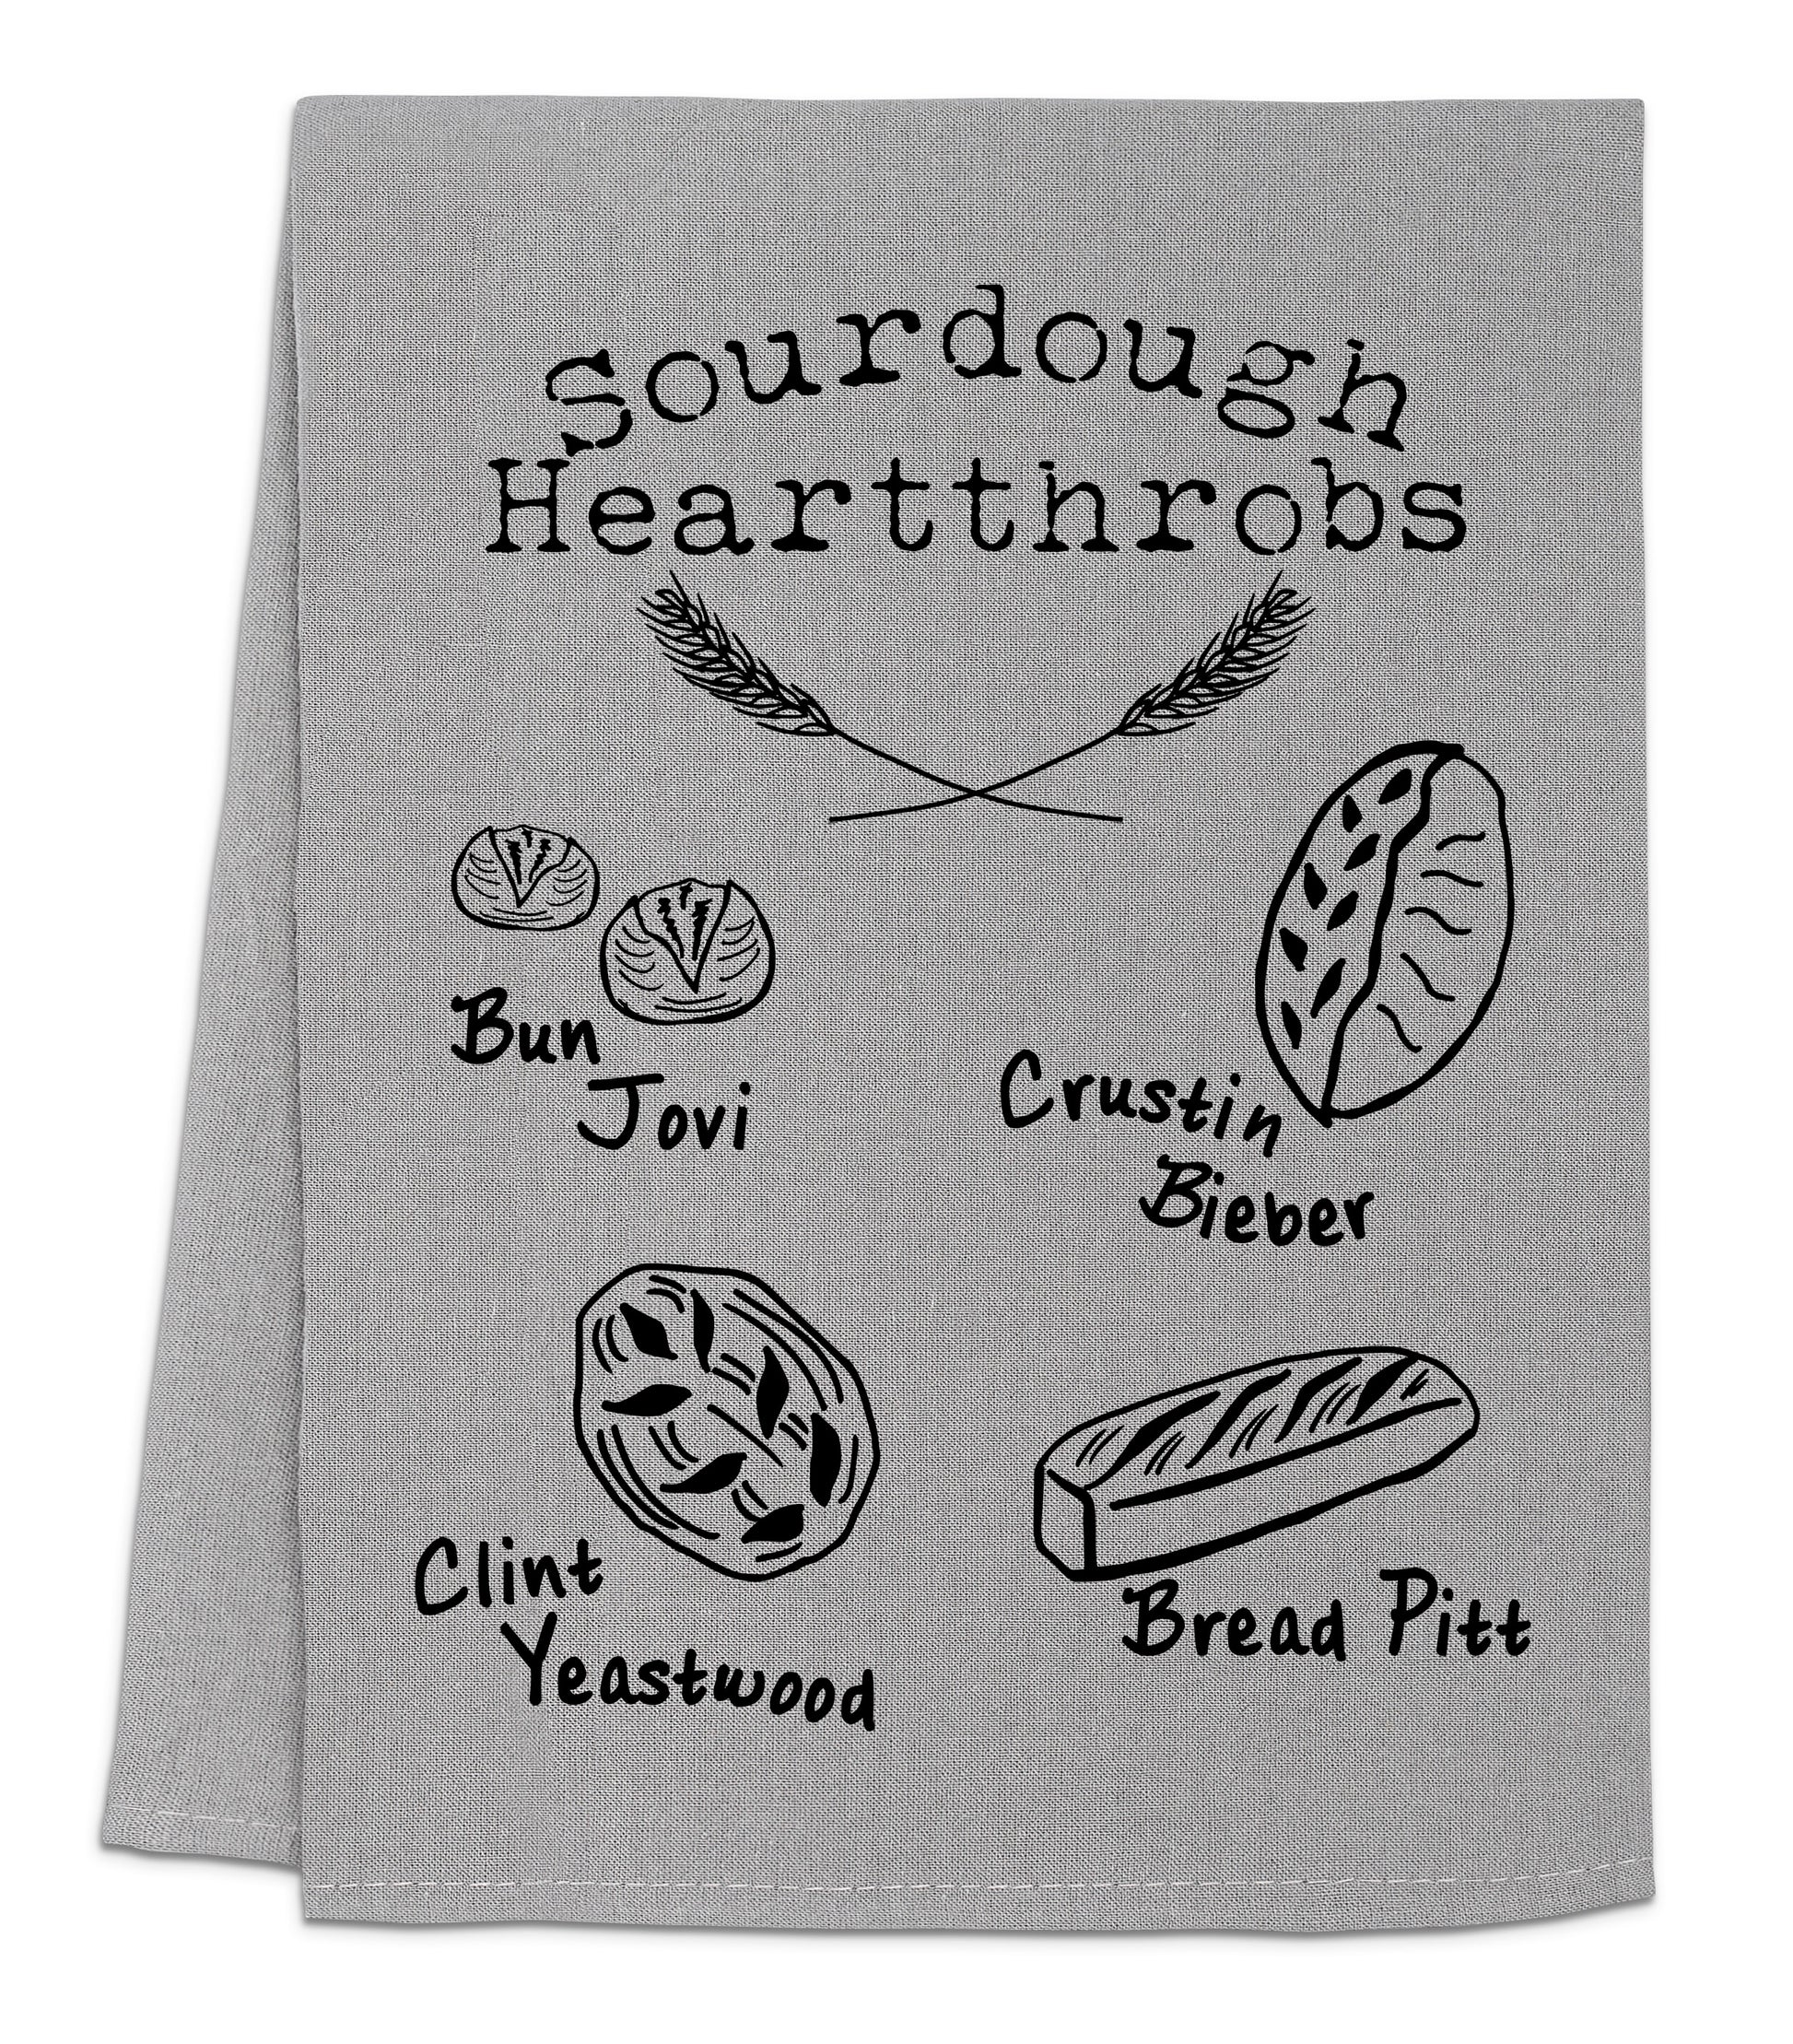 a dish towel with the words sourdough heartthrobs on it